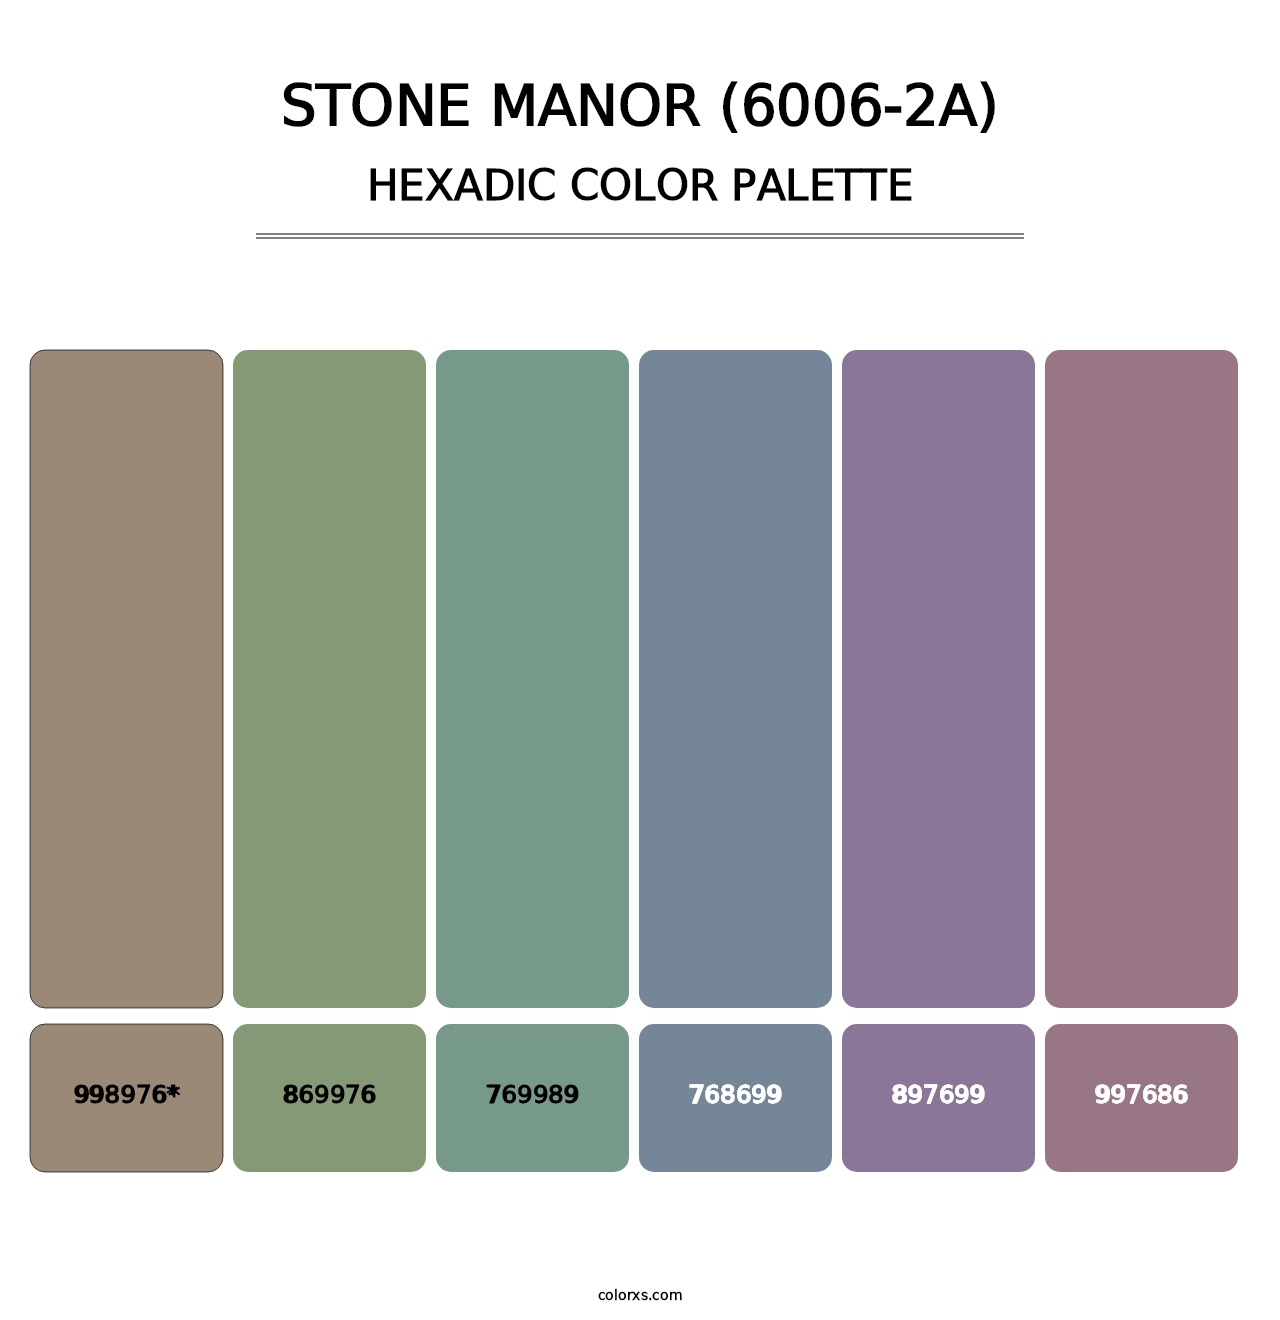 Stone Manor (6006-2A) - Hexadic Color Palette